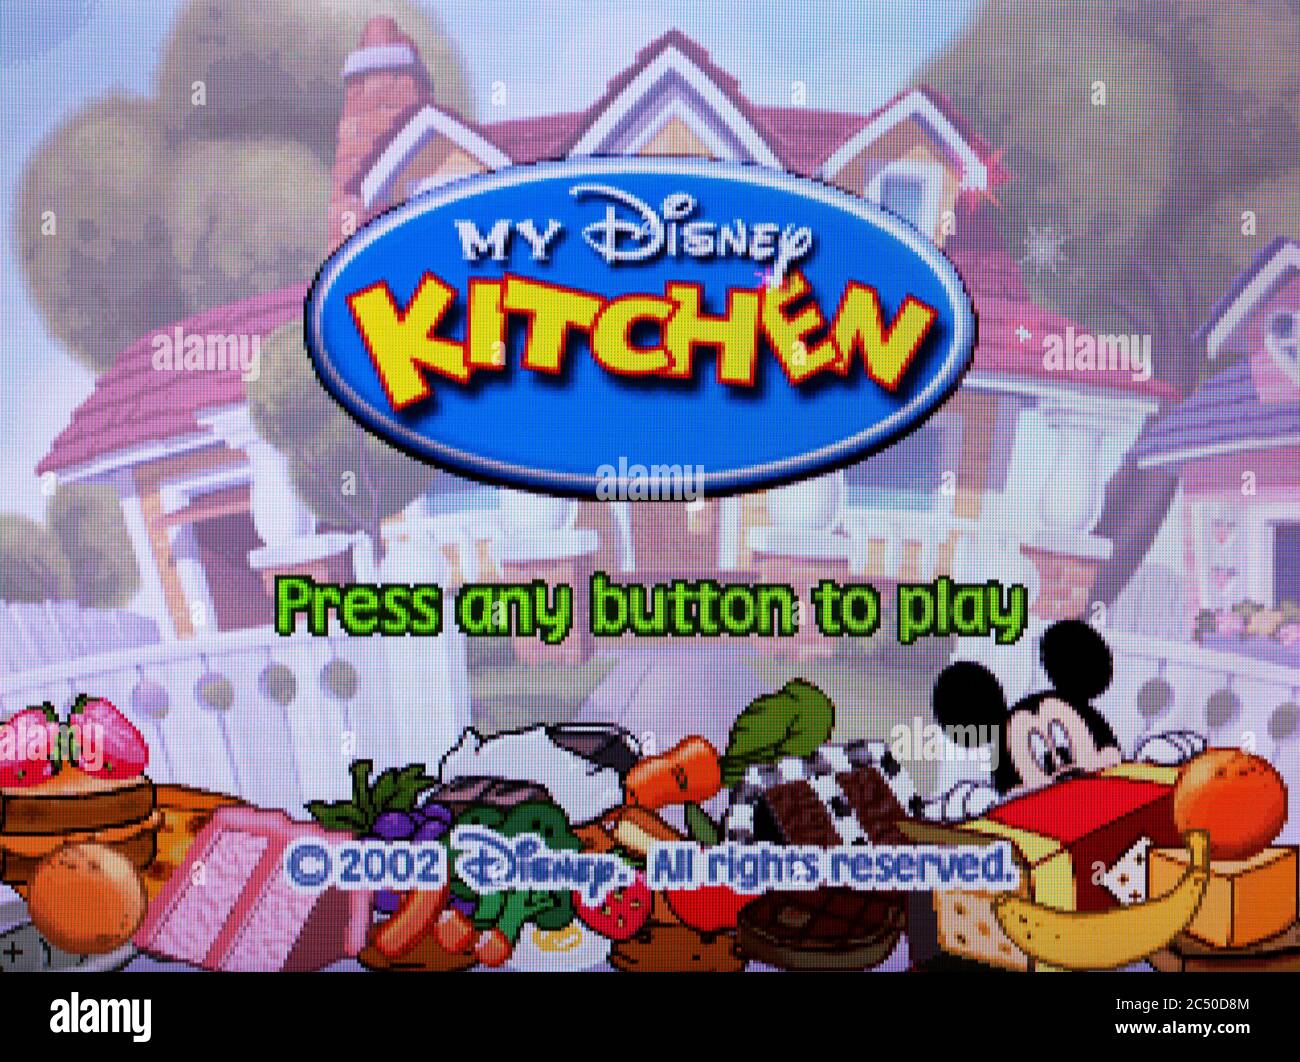 https://c8.alamy.com/comp/2C50D8M/my-disney-kitchen-sony-playstation-1-ps1-psx-editorial-use-only-2C50D8M.jpg